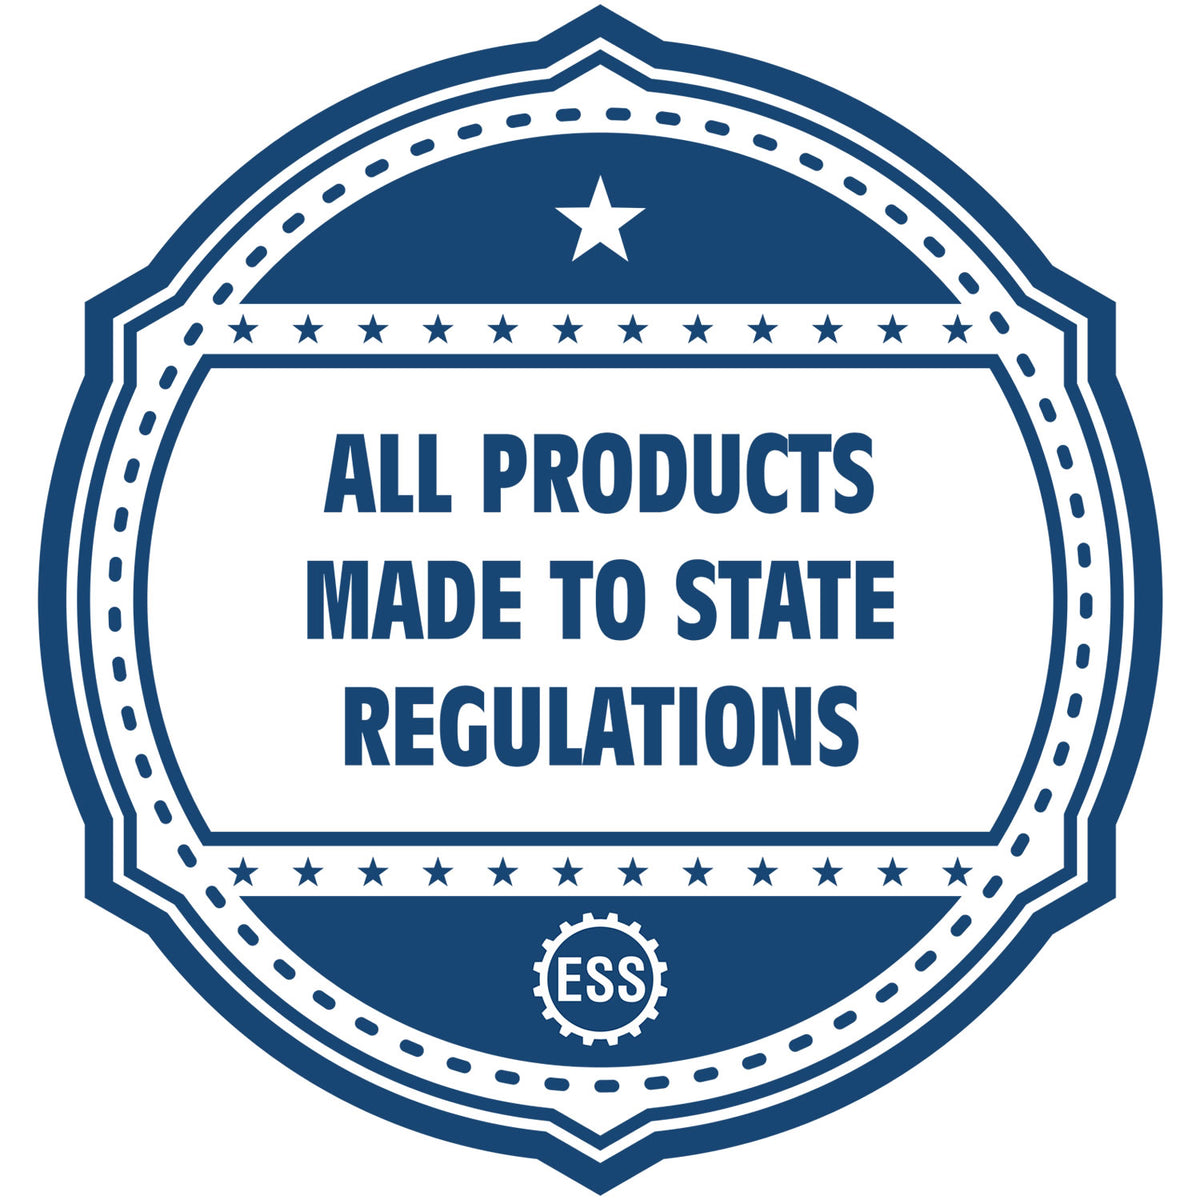 An icon or badge element for the MaxLight Premium Pre-Inked Utah State Seal Notarial Stamp showing that this product is made in compliance with state regulations.